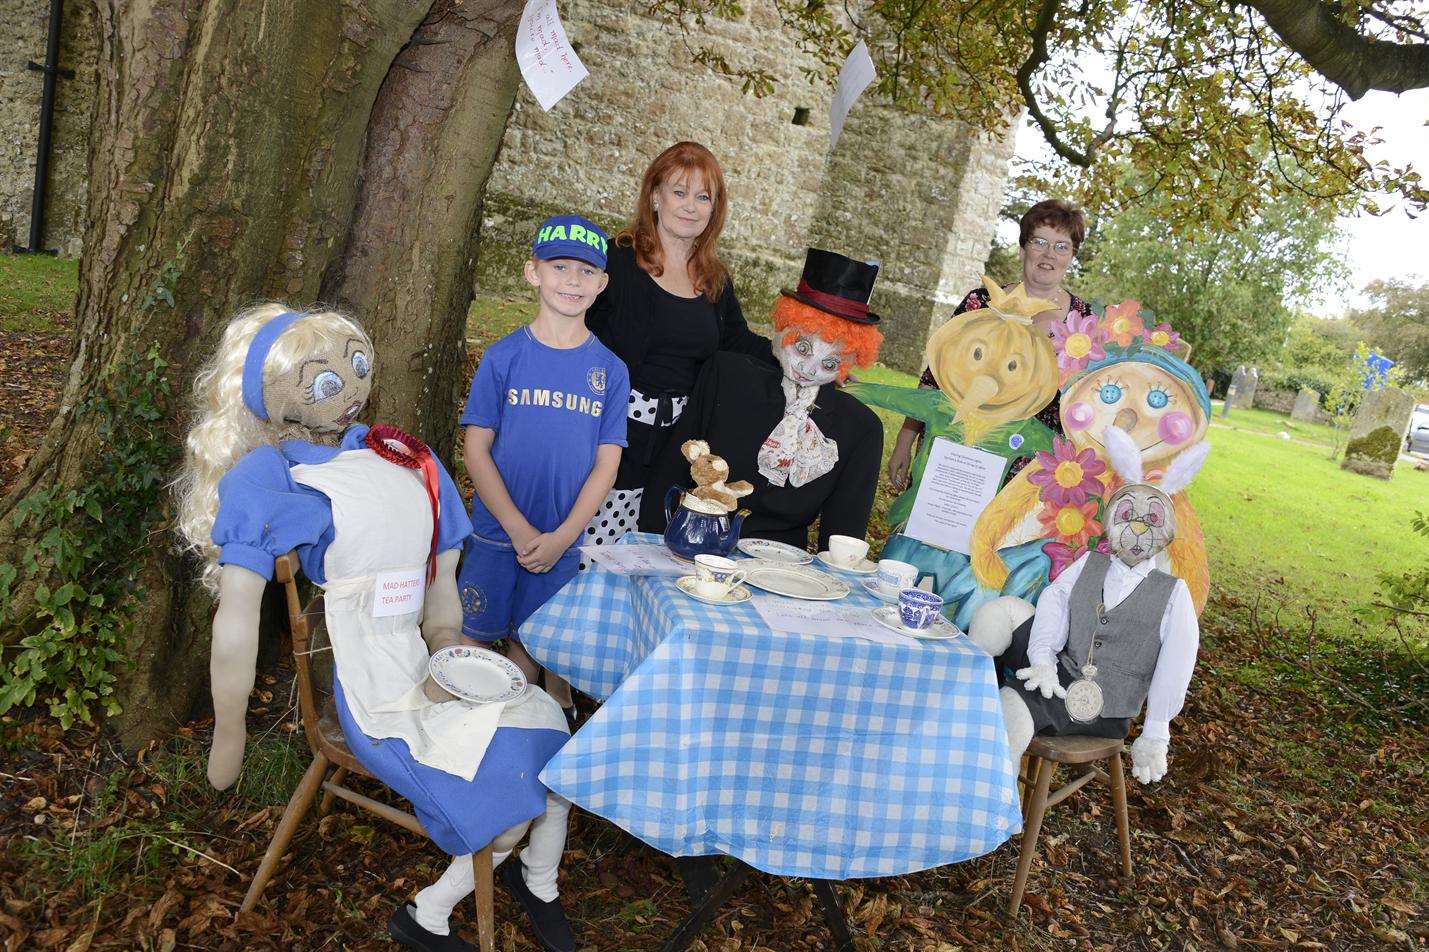 Harry Hinds, 6, Anita Gudge and Linda Andrews join the scarecrow Mad Hatter's Tea Party